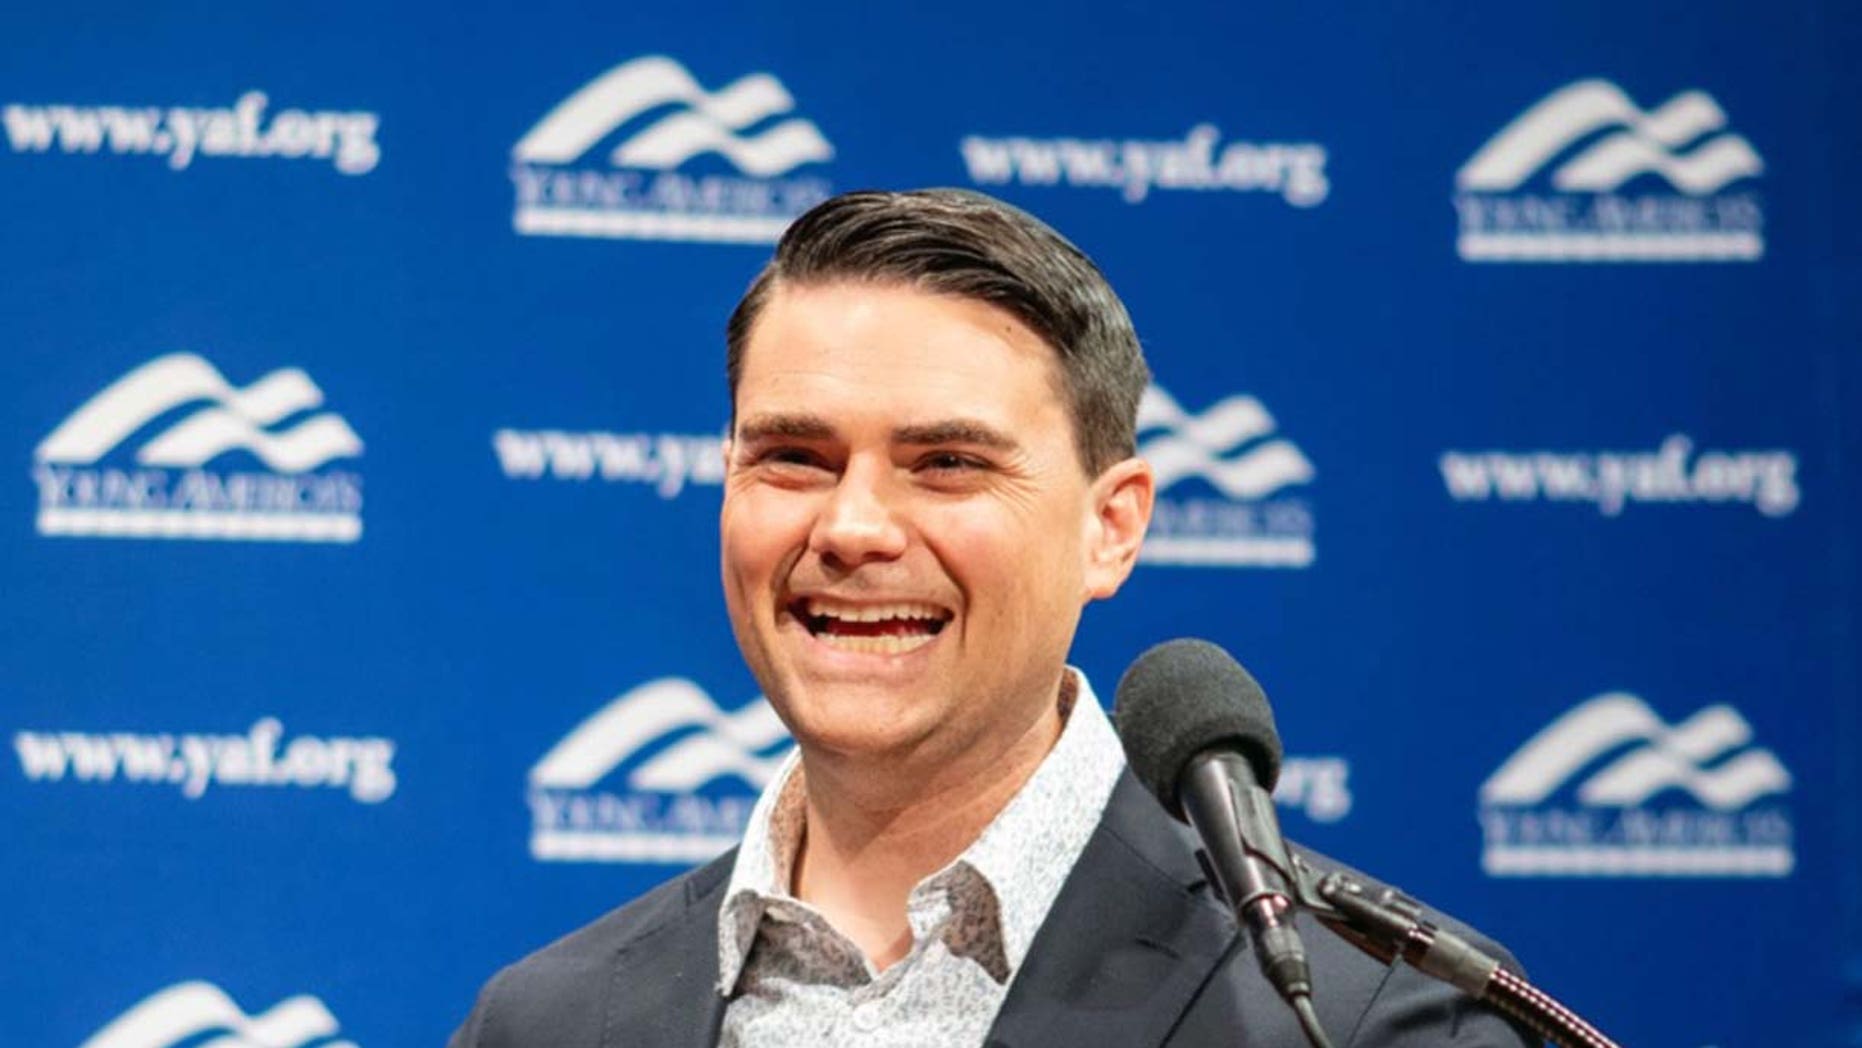 Ben Shapiro to speak at Christian college after it initially spurned